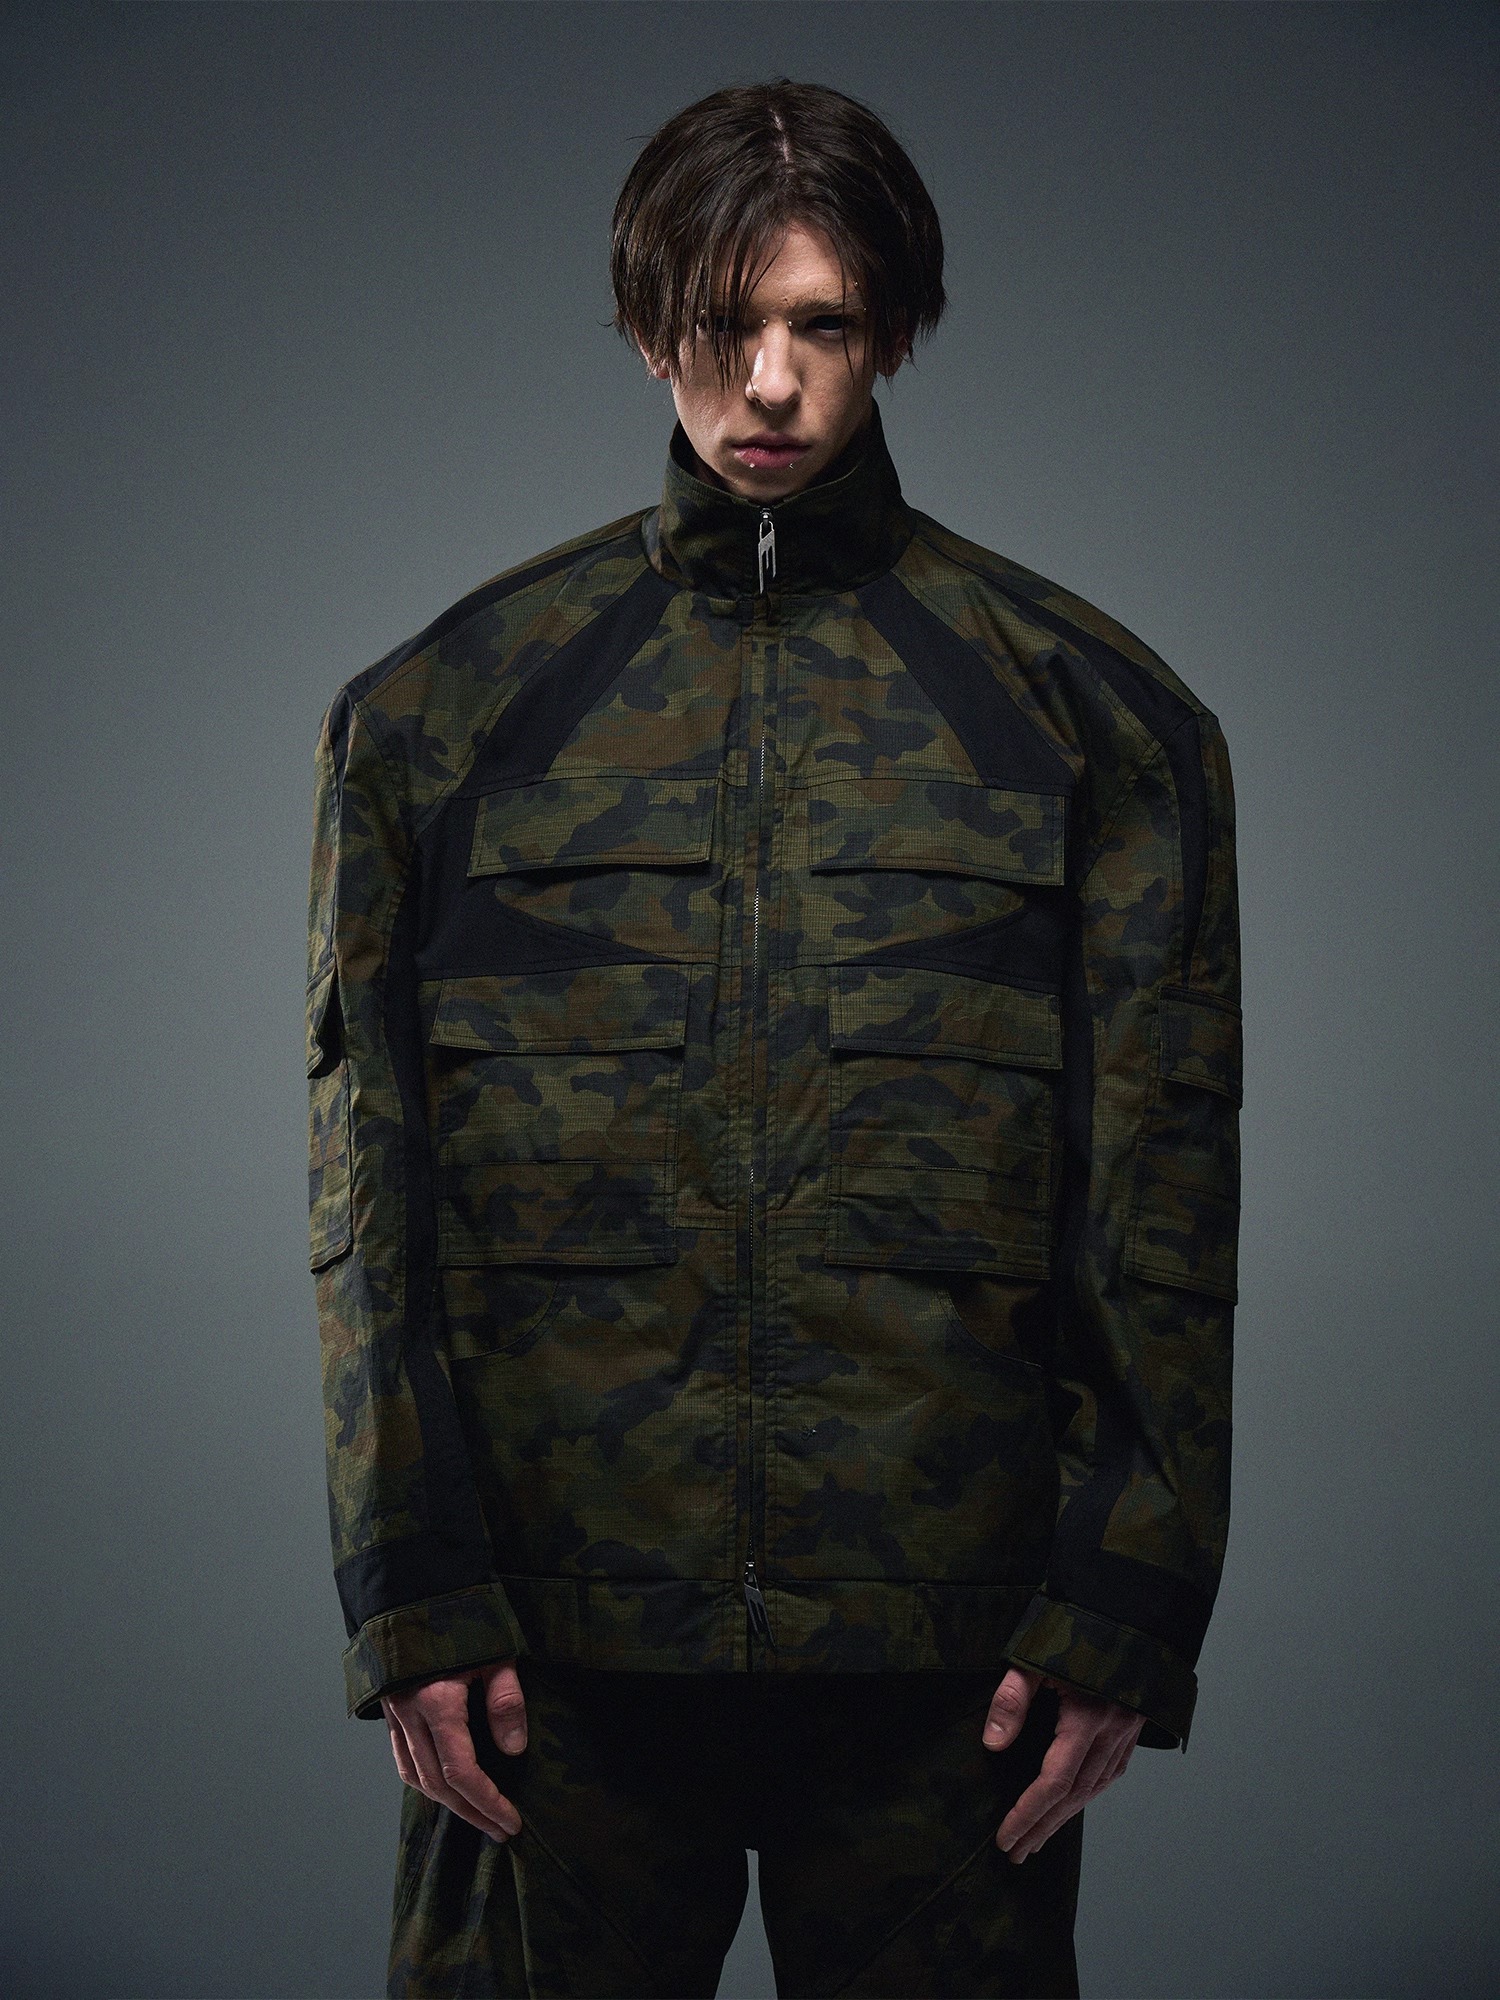 BLINDNOPLAN 24SS Color-blocked Texture Plaid Camouflage Work Jacket